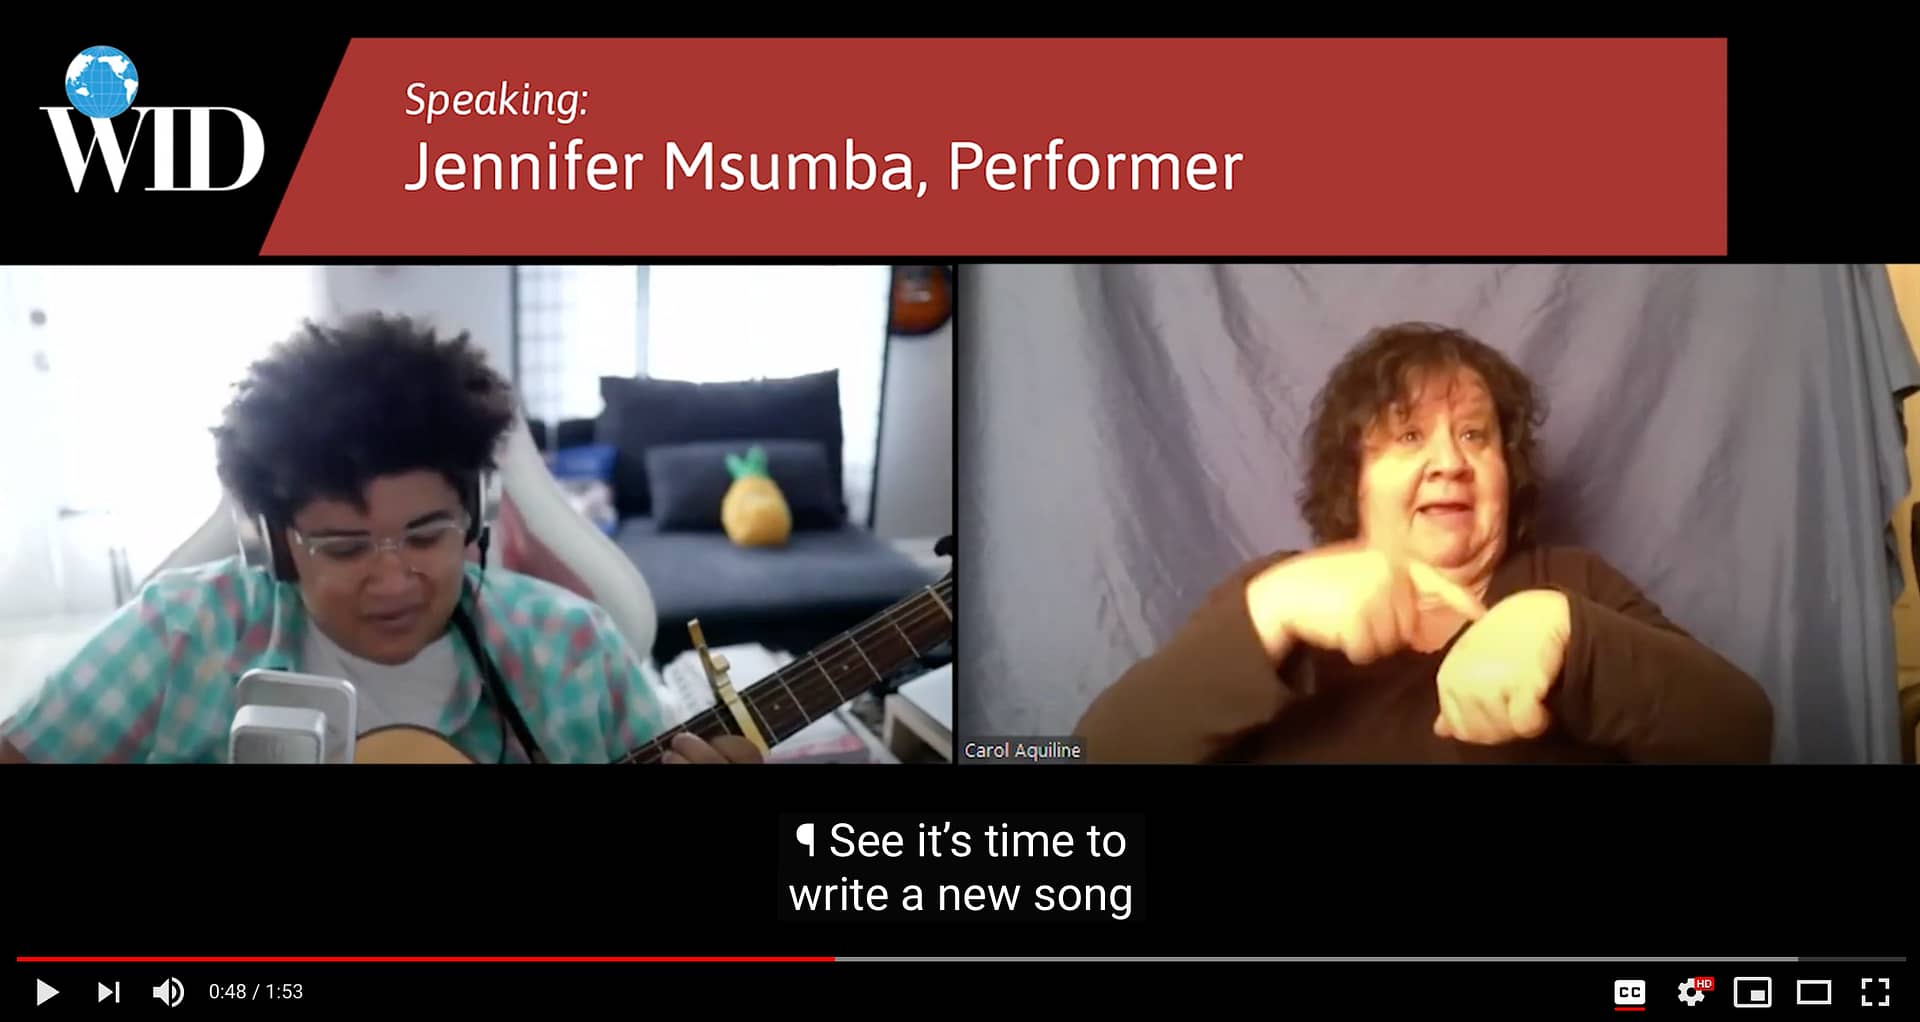 Screenshot of zoom meeting with performer Jennifer Msumba singing and playing guitar, while an International Sign interpreter, Carol Aquiline, signs alongside her. Caption reads: See it's time to write a new song.